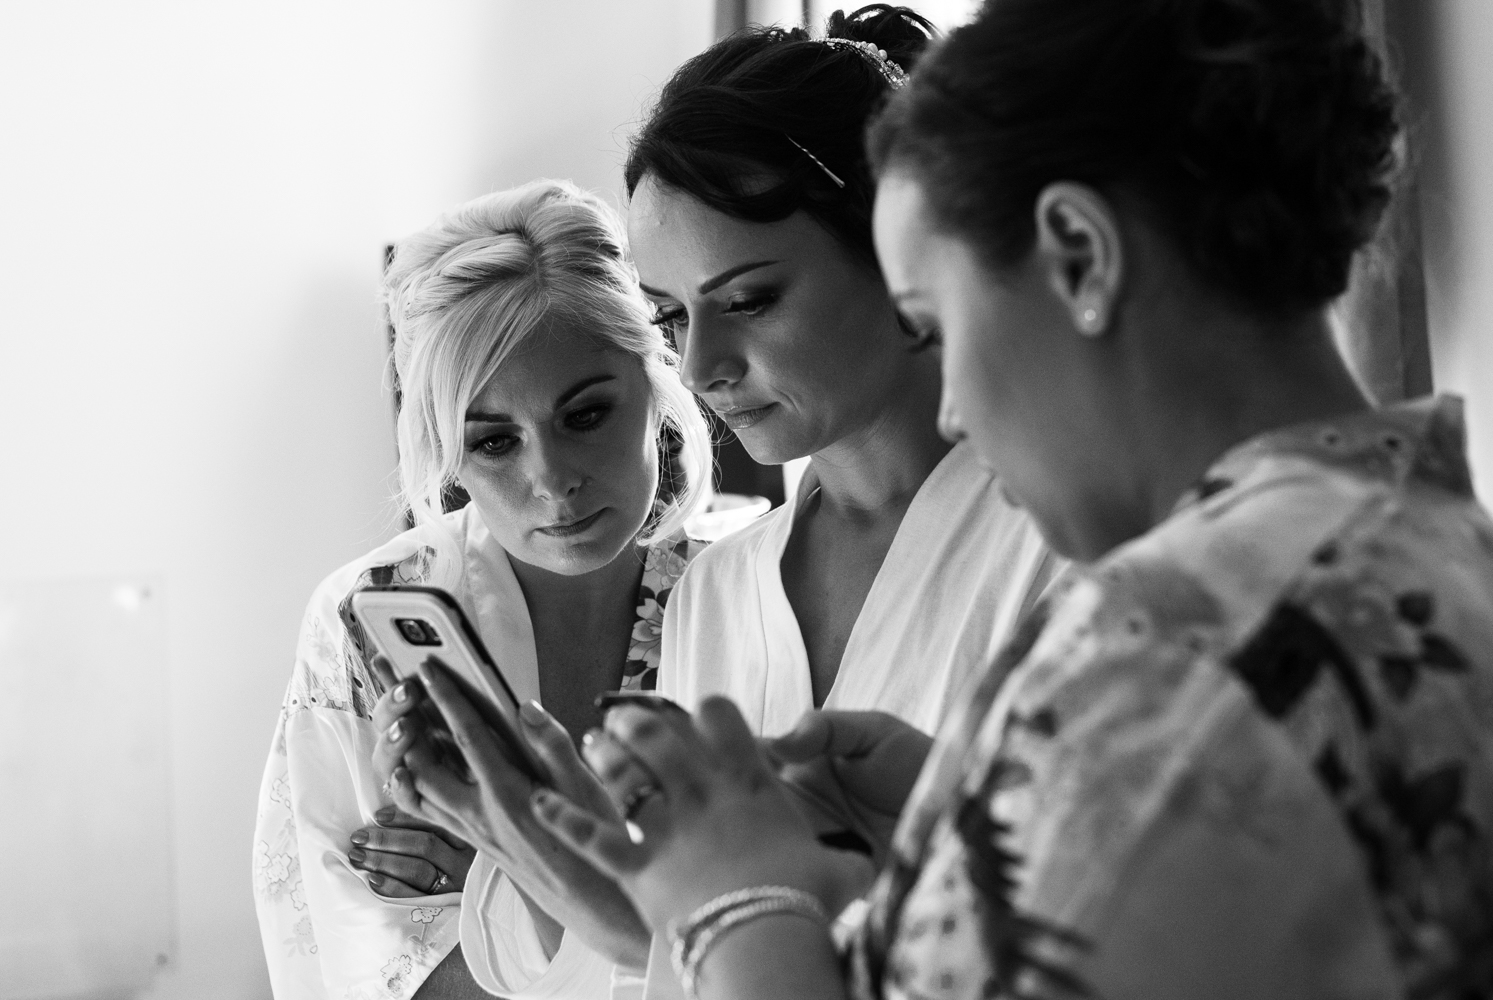 The bride and bridesmaid looking at a message on a mobile phone